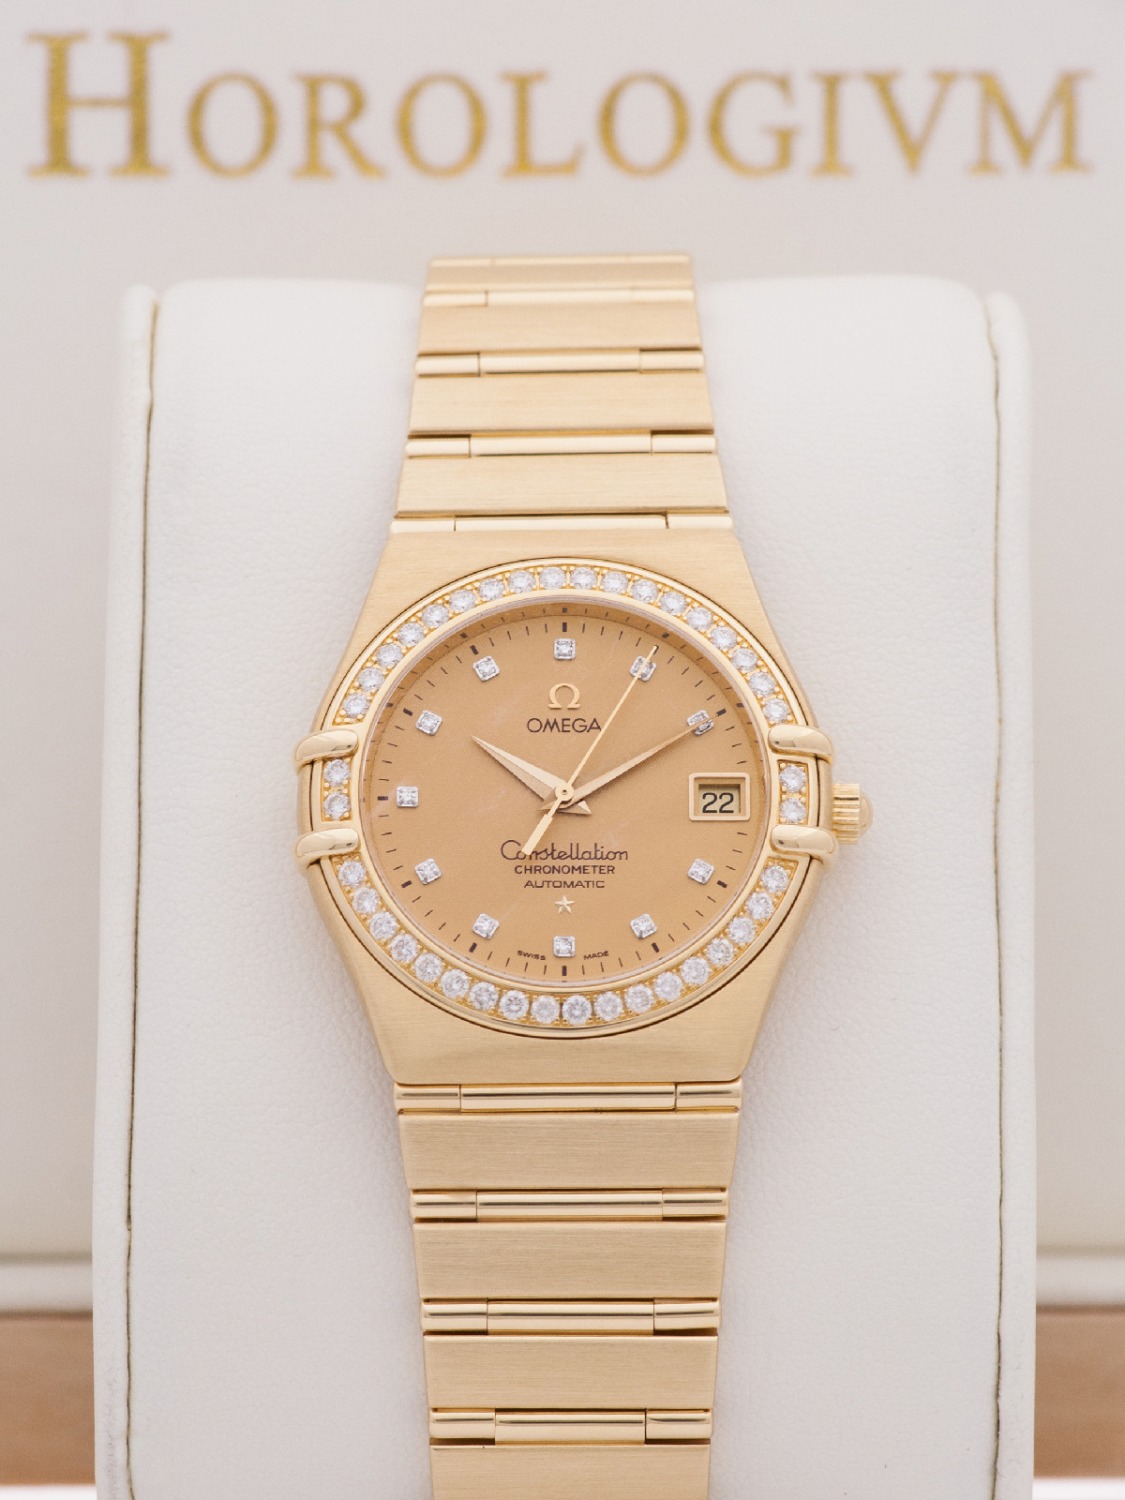 Omega Constellation Chronometer Automatic Ref. 1107.15.00 YG watch, yellow gold